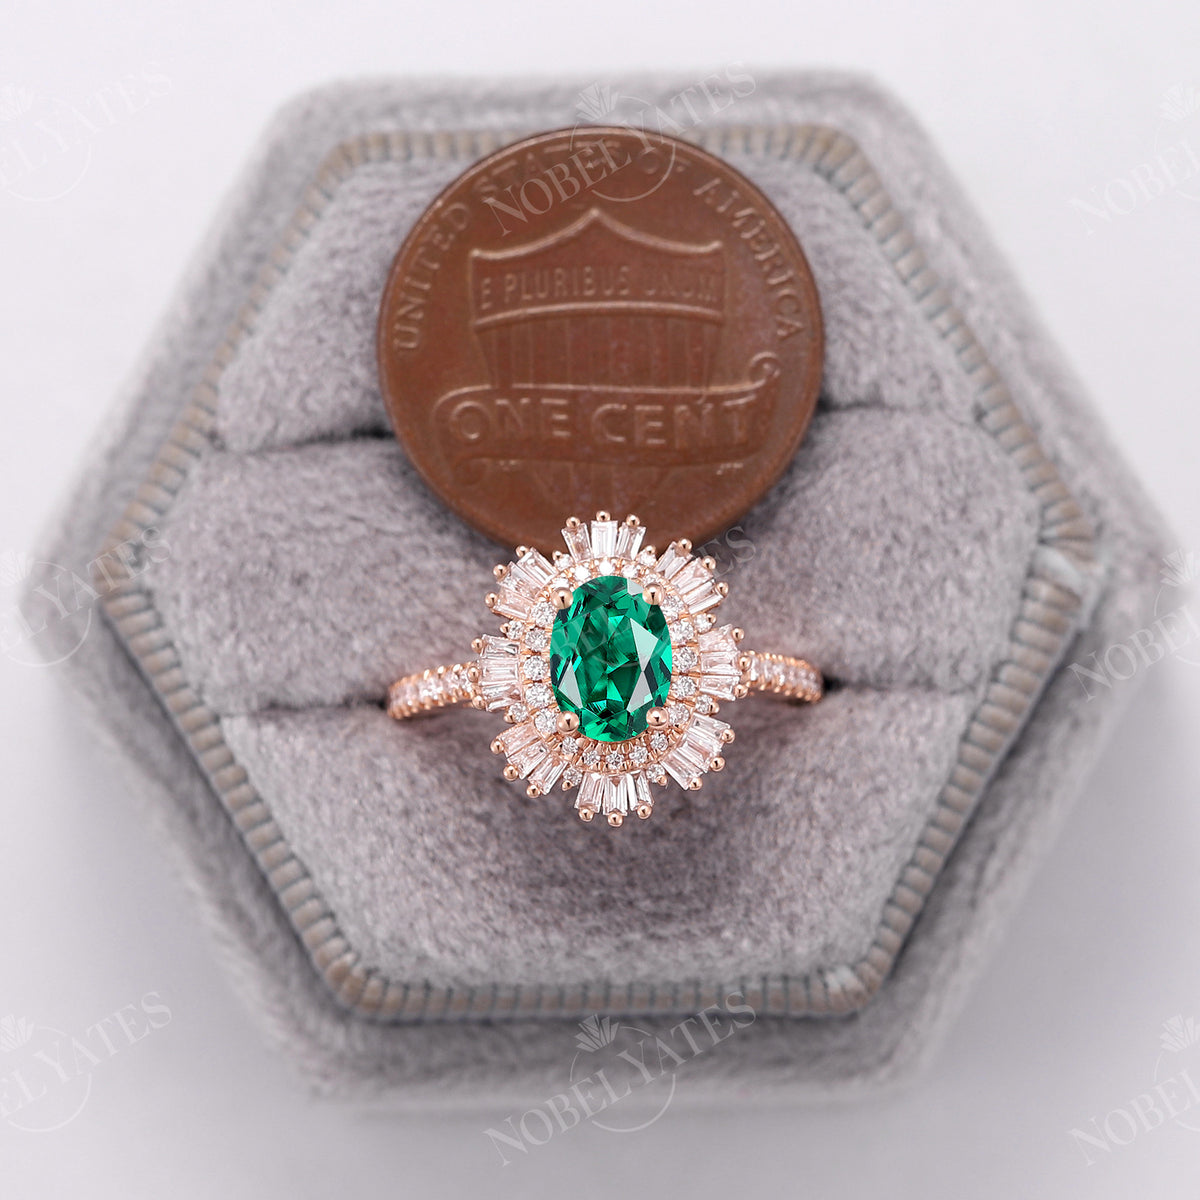 Lab Emerald Art Deco Halo Engagement Ring Rose Gold Pave Band